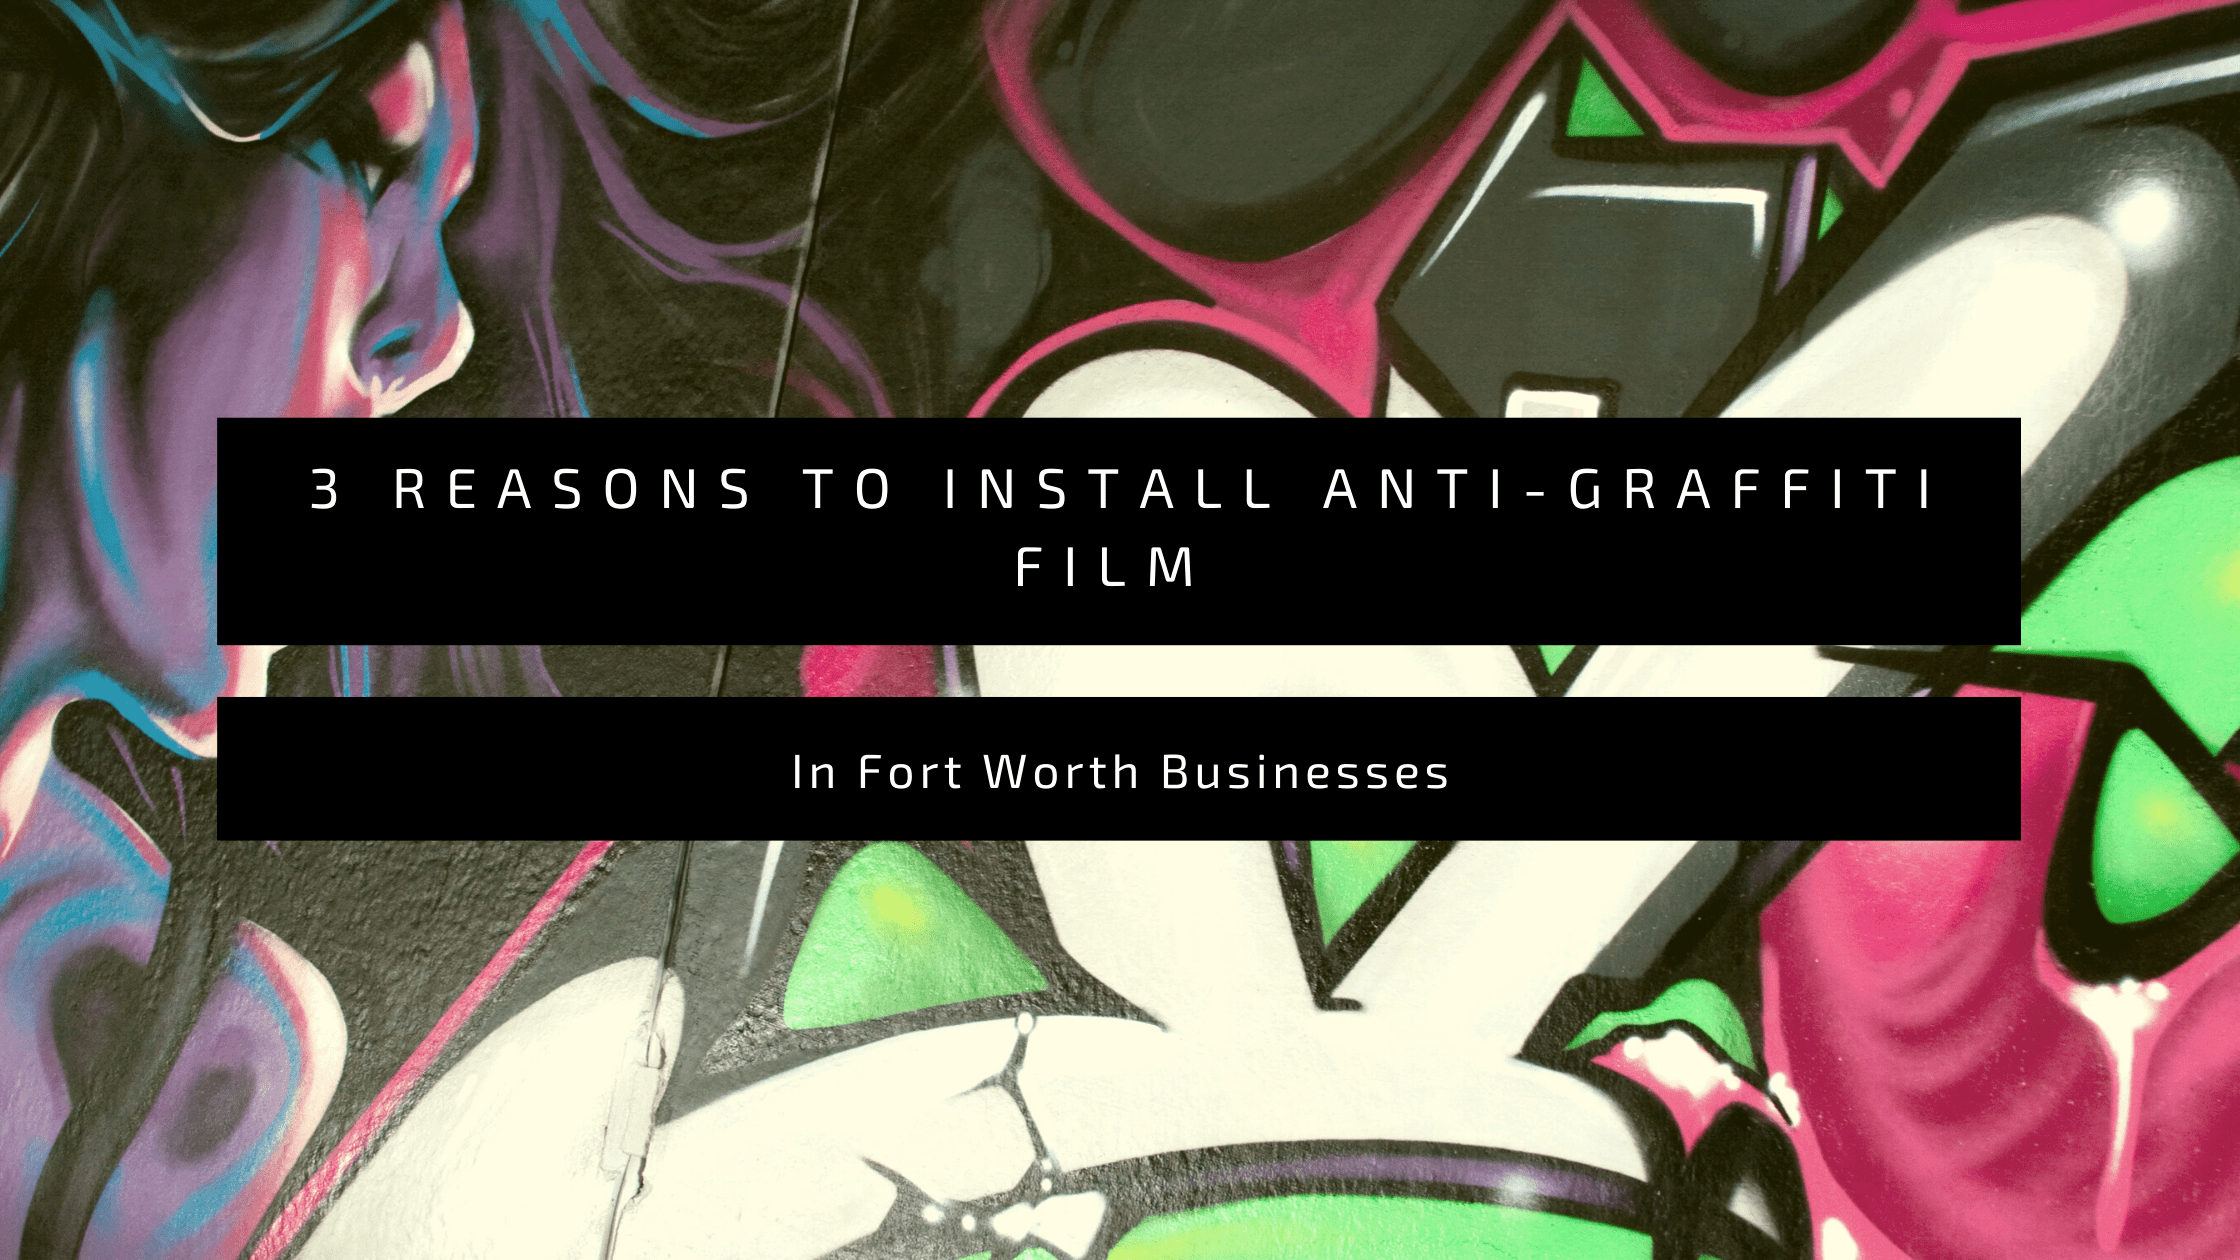 3 Reasons to Install Anti-Graffiti Film In Fort Worth Businesses